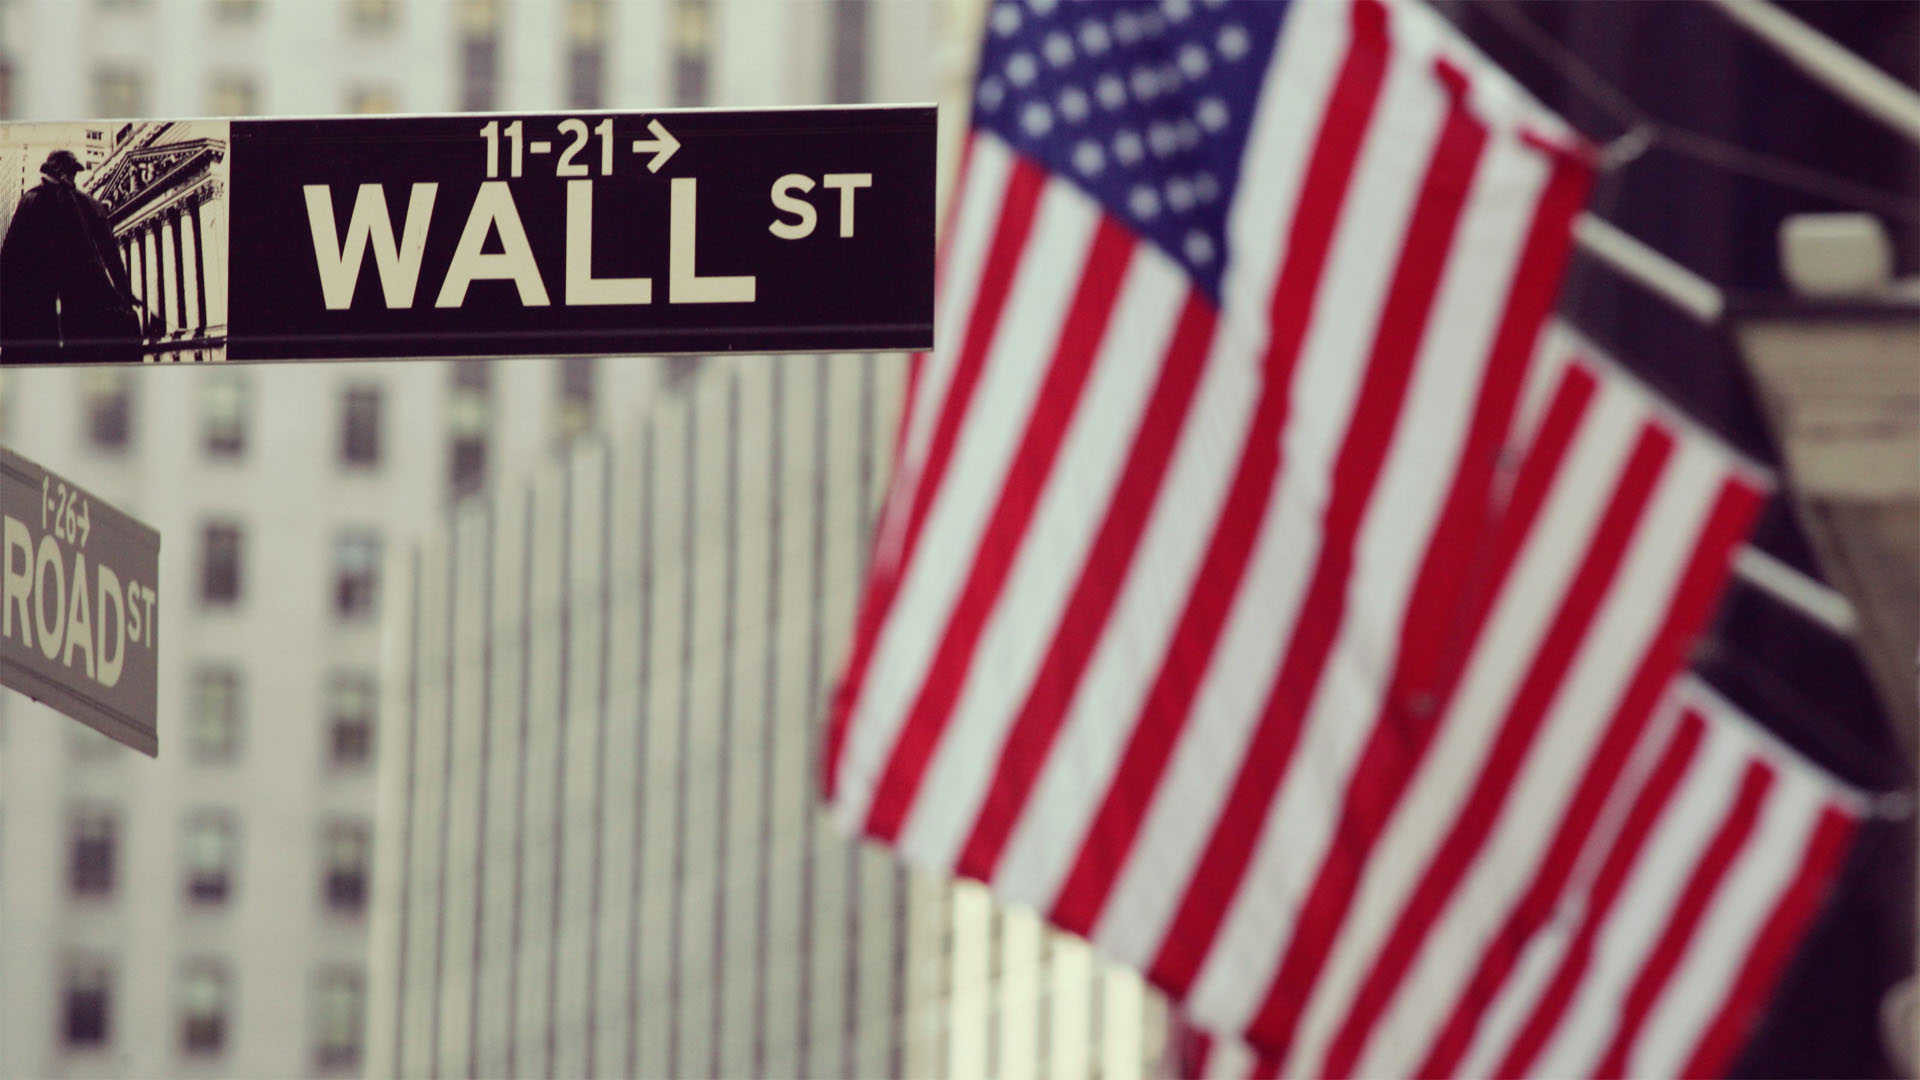 Wall Street Photos Download The BEST Free Wall Street Stock Photos  HD  Images